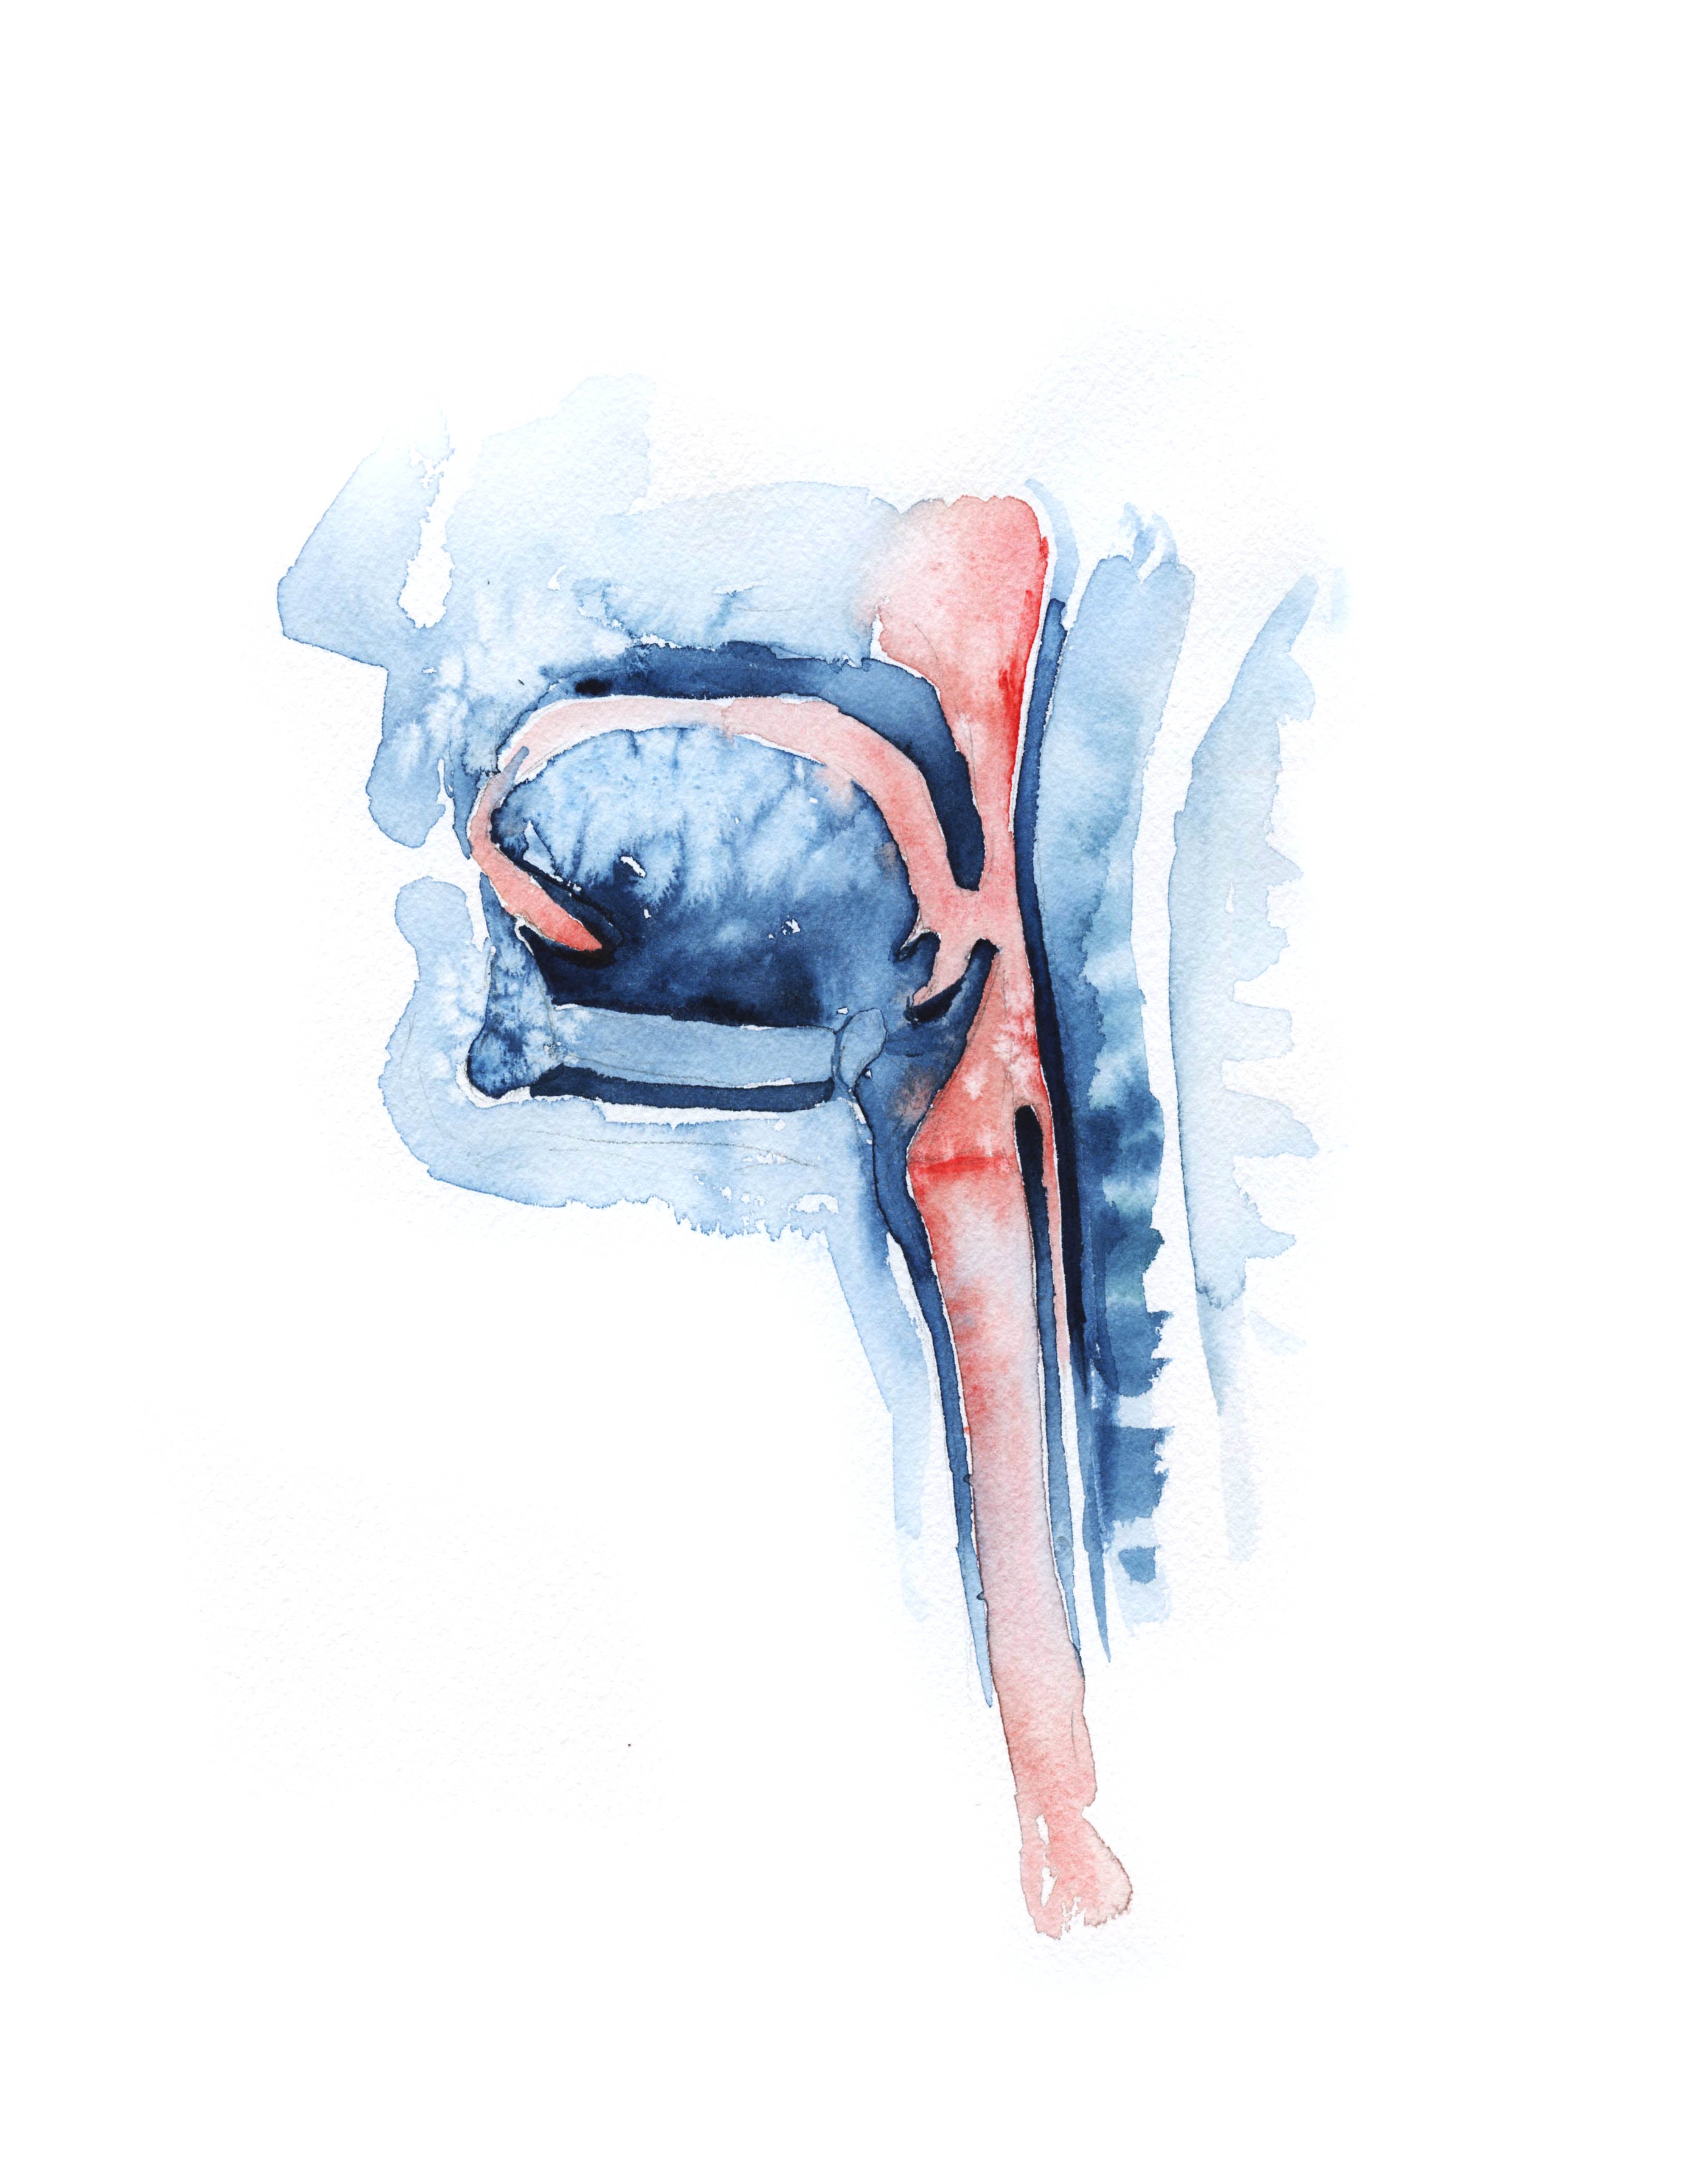 Unframed watercolor painting showing a swallowing mechanism with mouth, throat and tongue in prints and blues.